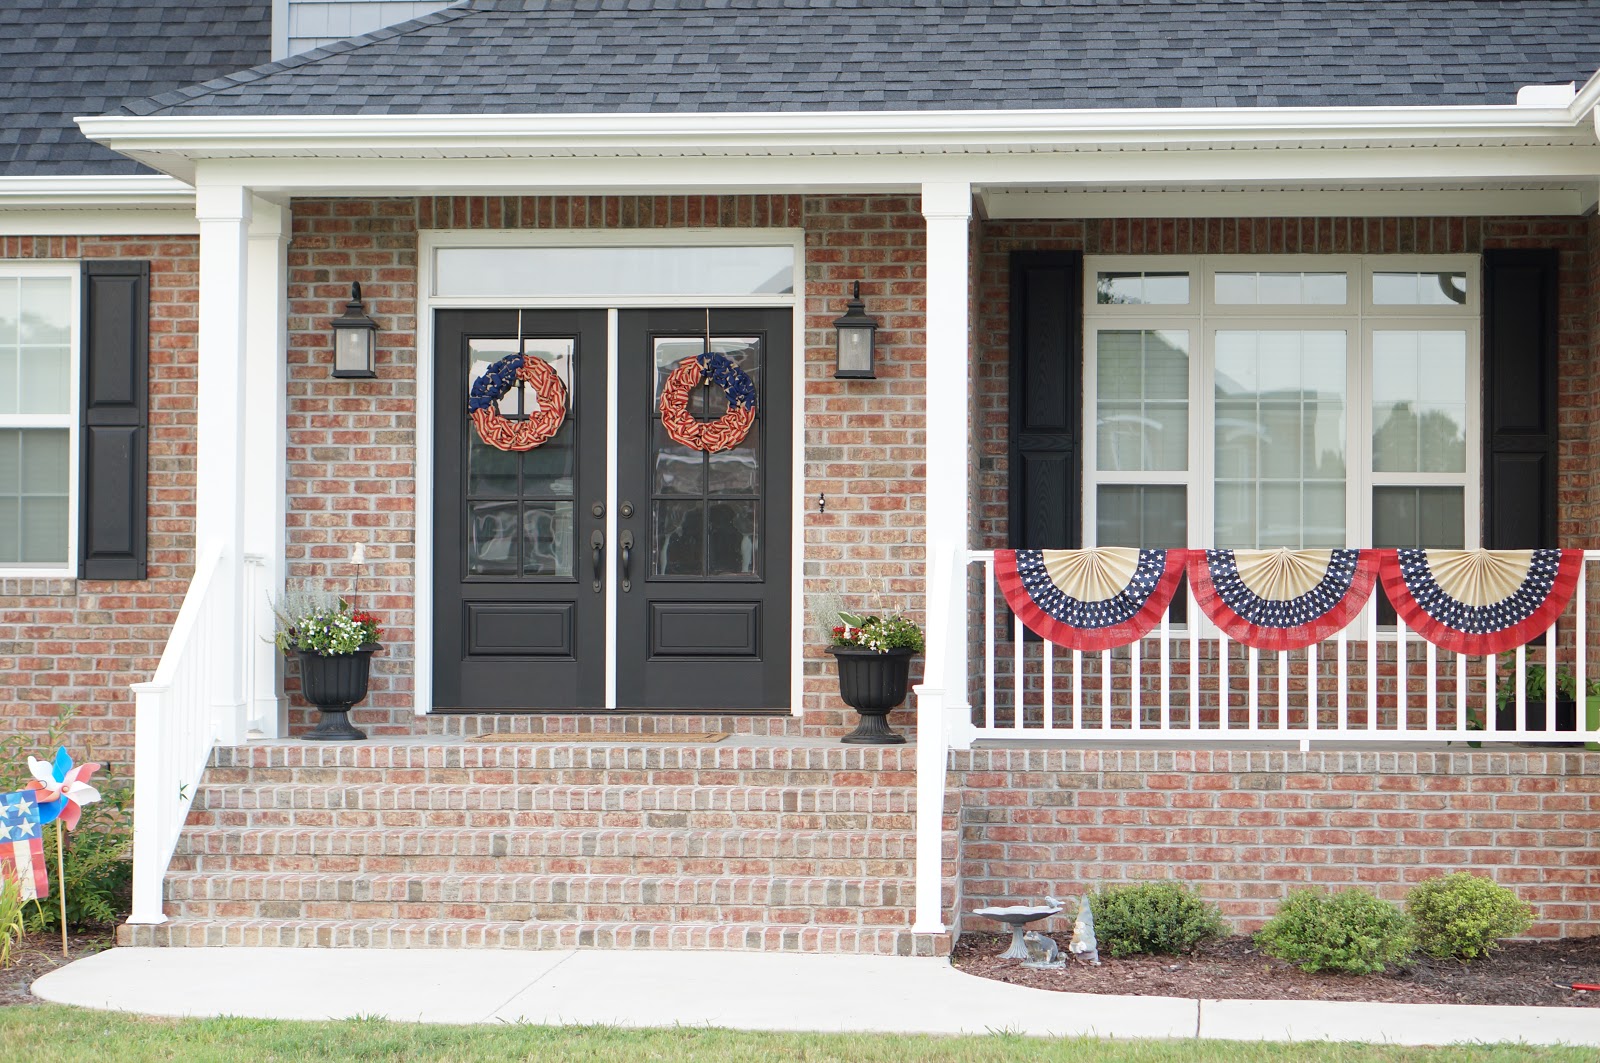 Popular North Carolina blogger Rebecca Lately shares her porch refresh for the Fourth of July.  Check it out if you love seasonal decor!